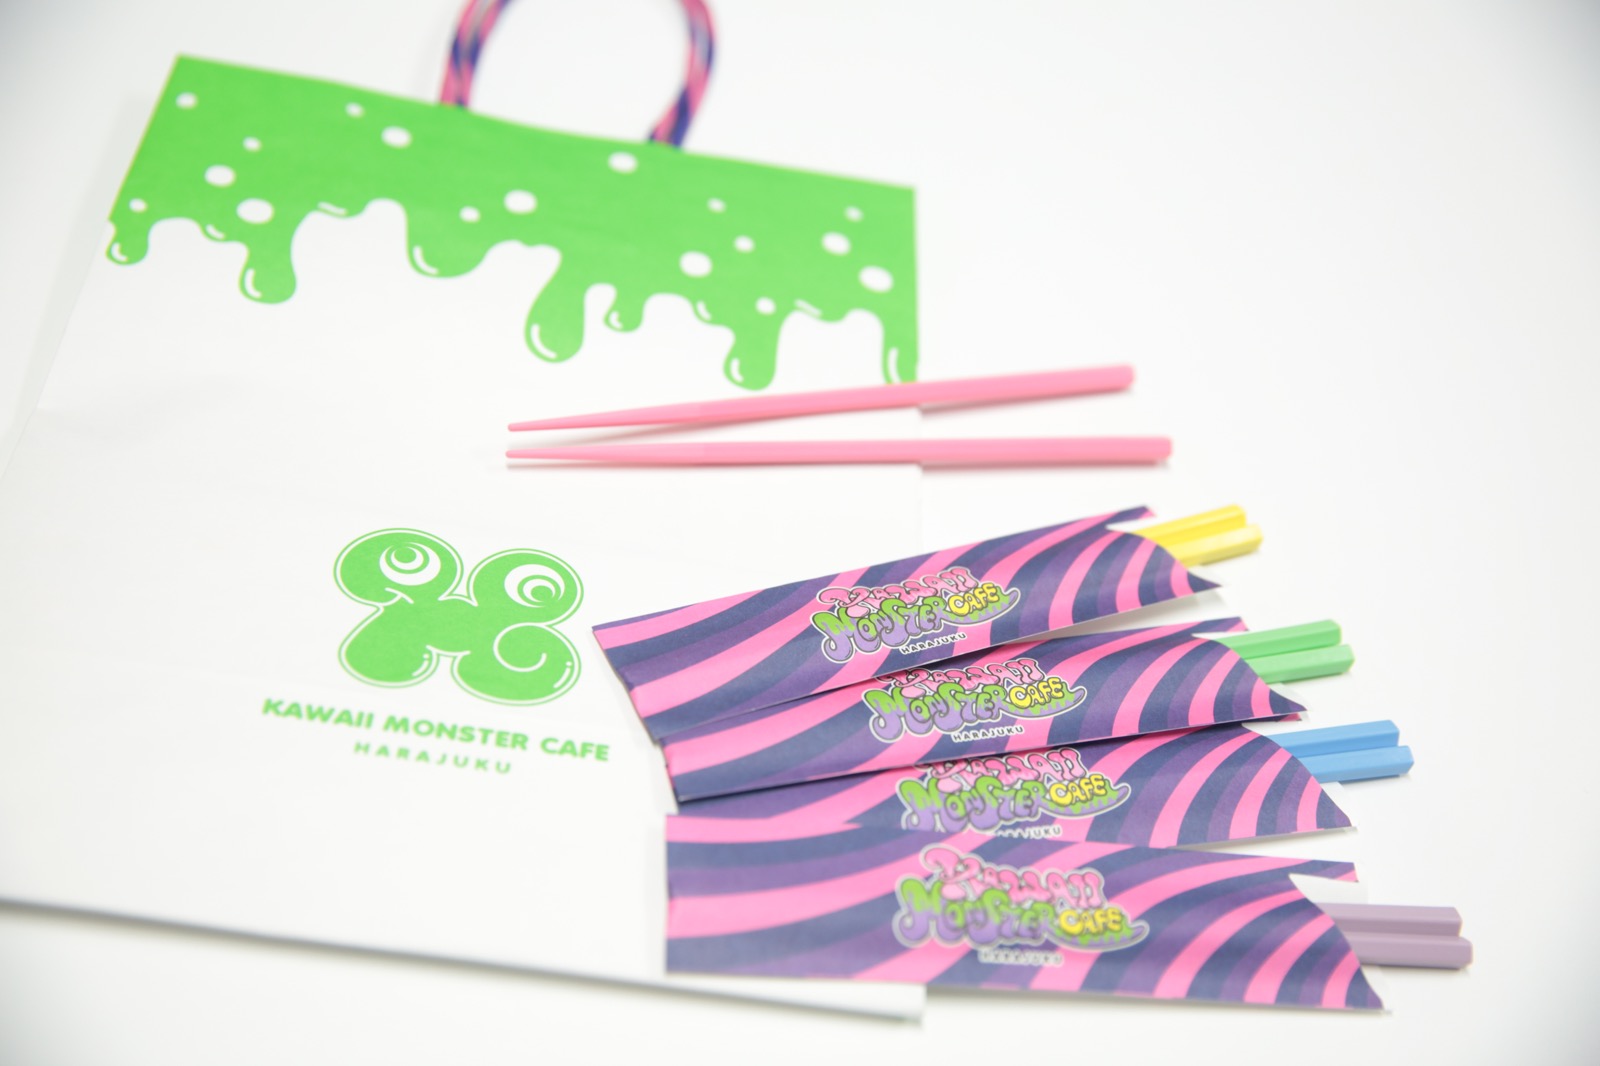 TGU Give Away : 5 Pairs of KAWAII MONSTER CAFE’s Colorful Chopsticks to 3 Readers!